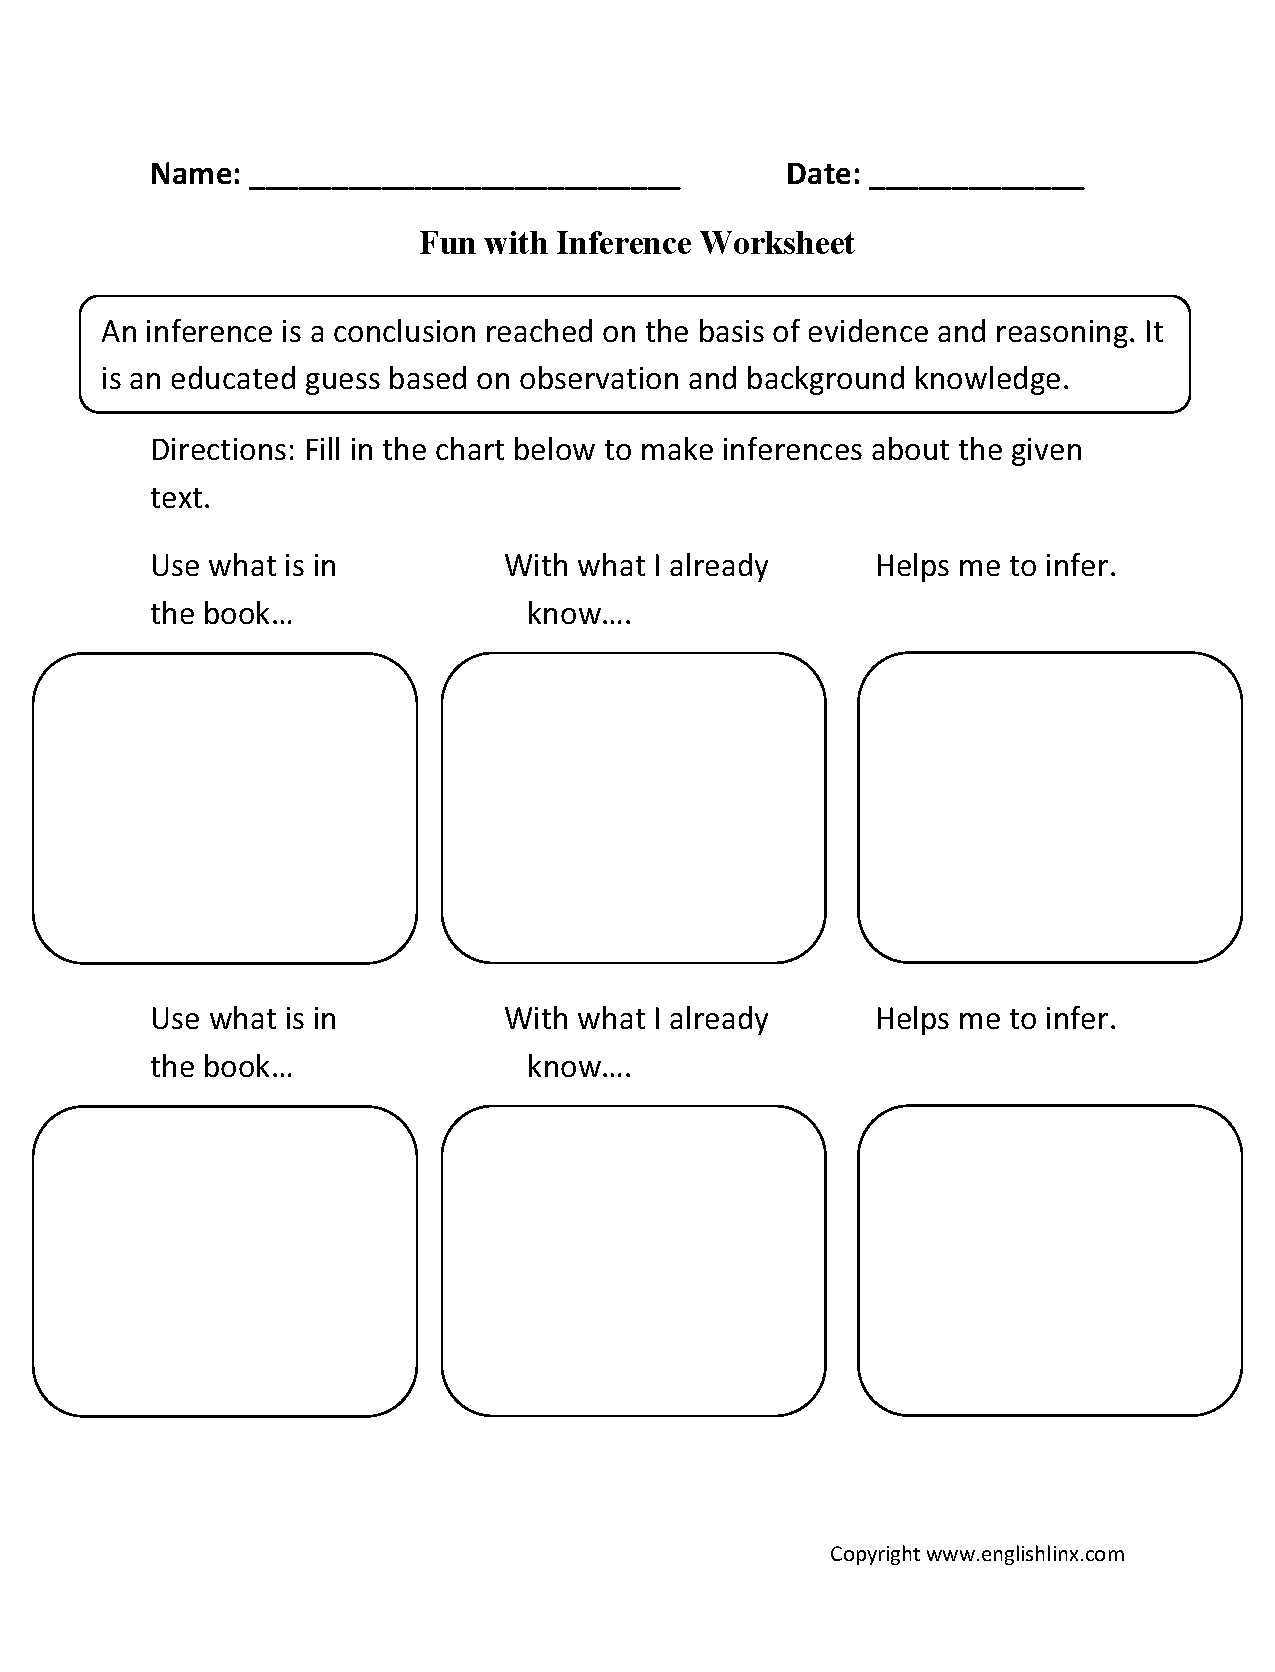 Drawing Conclusions Worksheets 3rd Grade together with Step 3 Aa Worksheet Inspirational 57 Best the 12 Steps